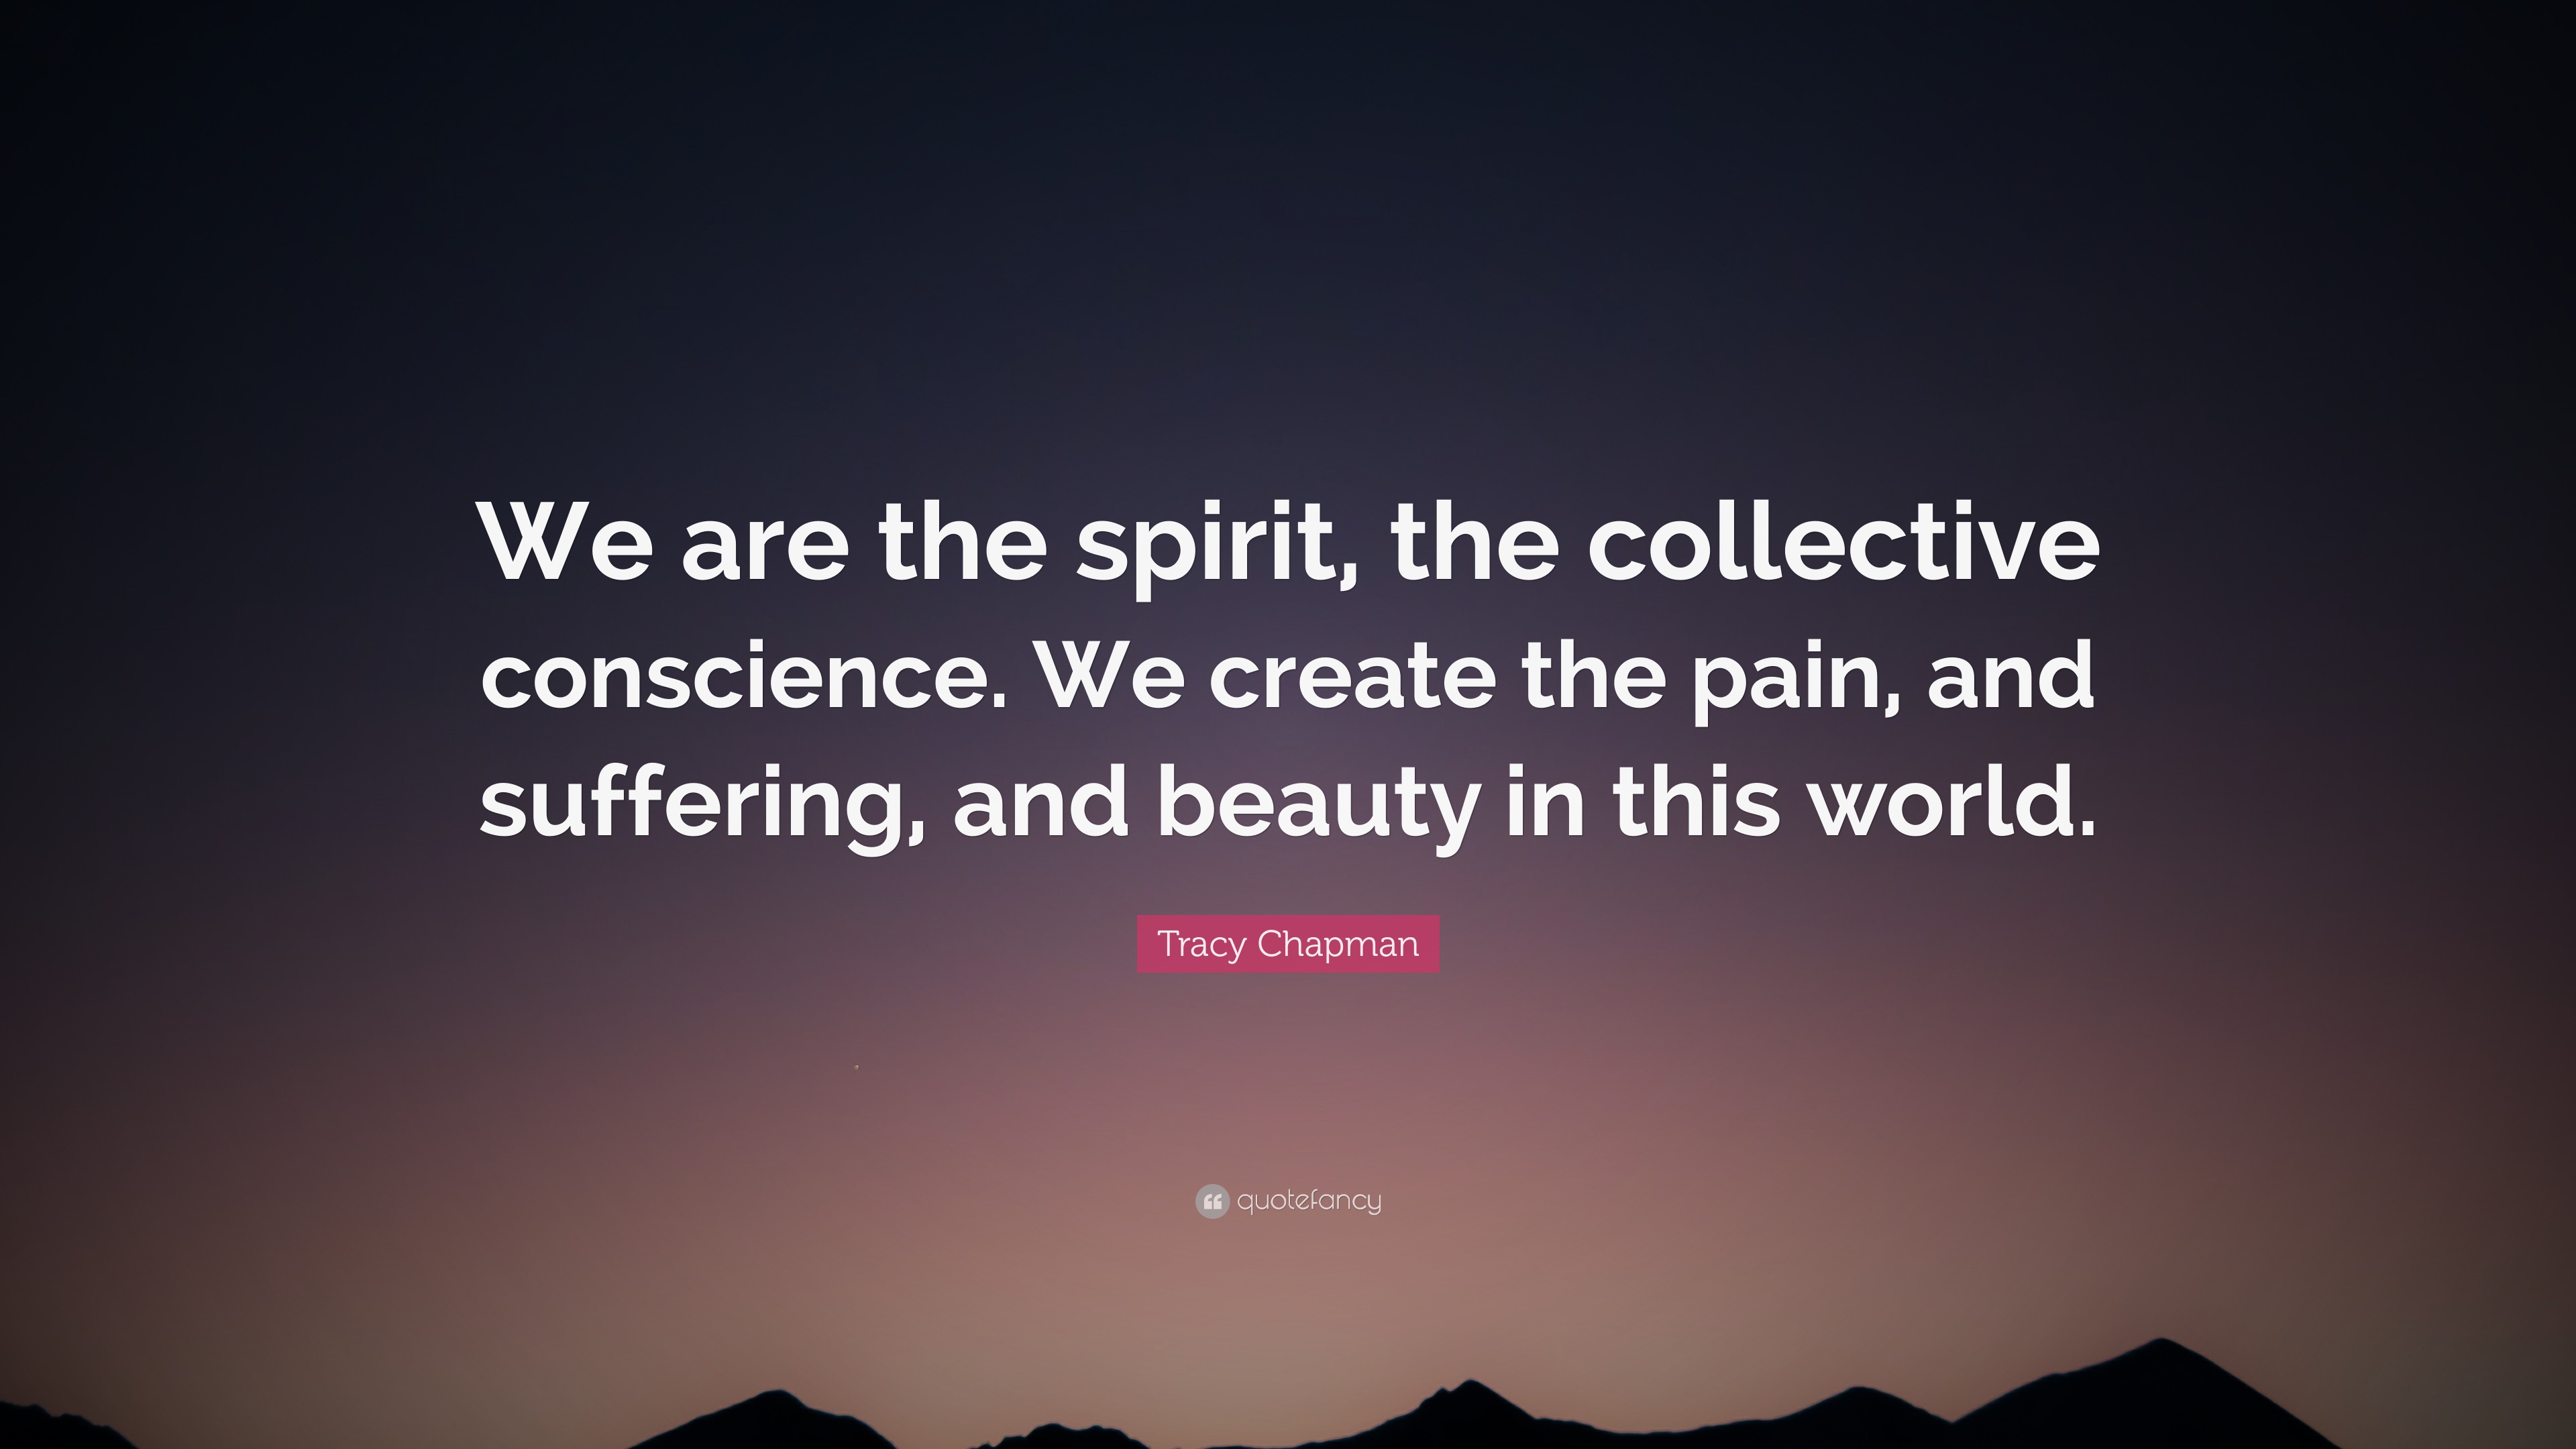 Tracy Chapman Quote We Are The Spirit The Collective Conscience We Create The Pain And Suffering